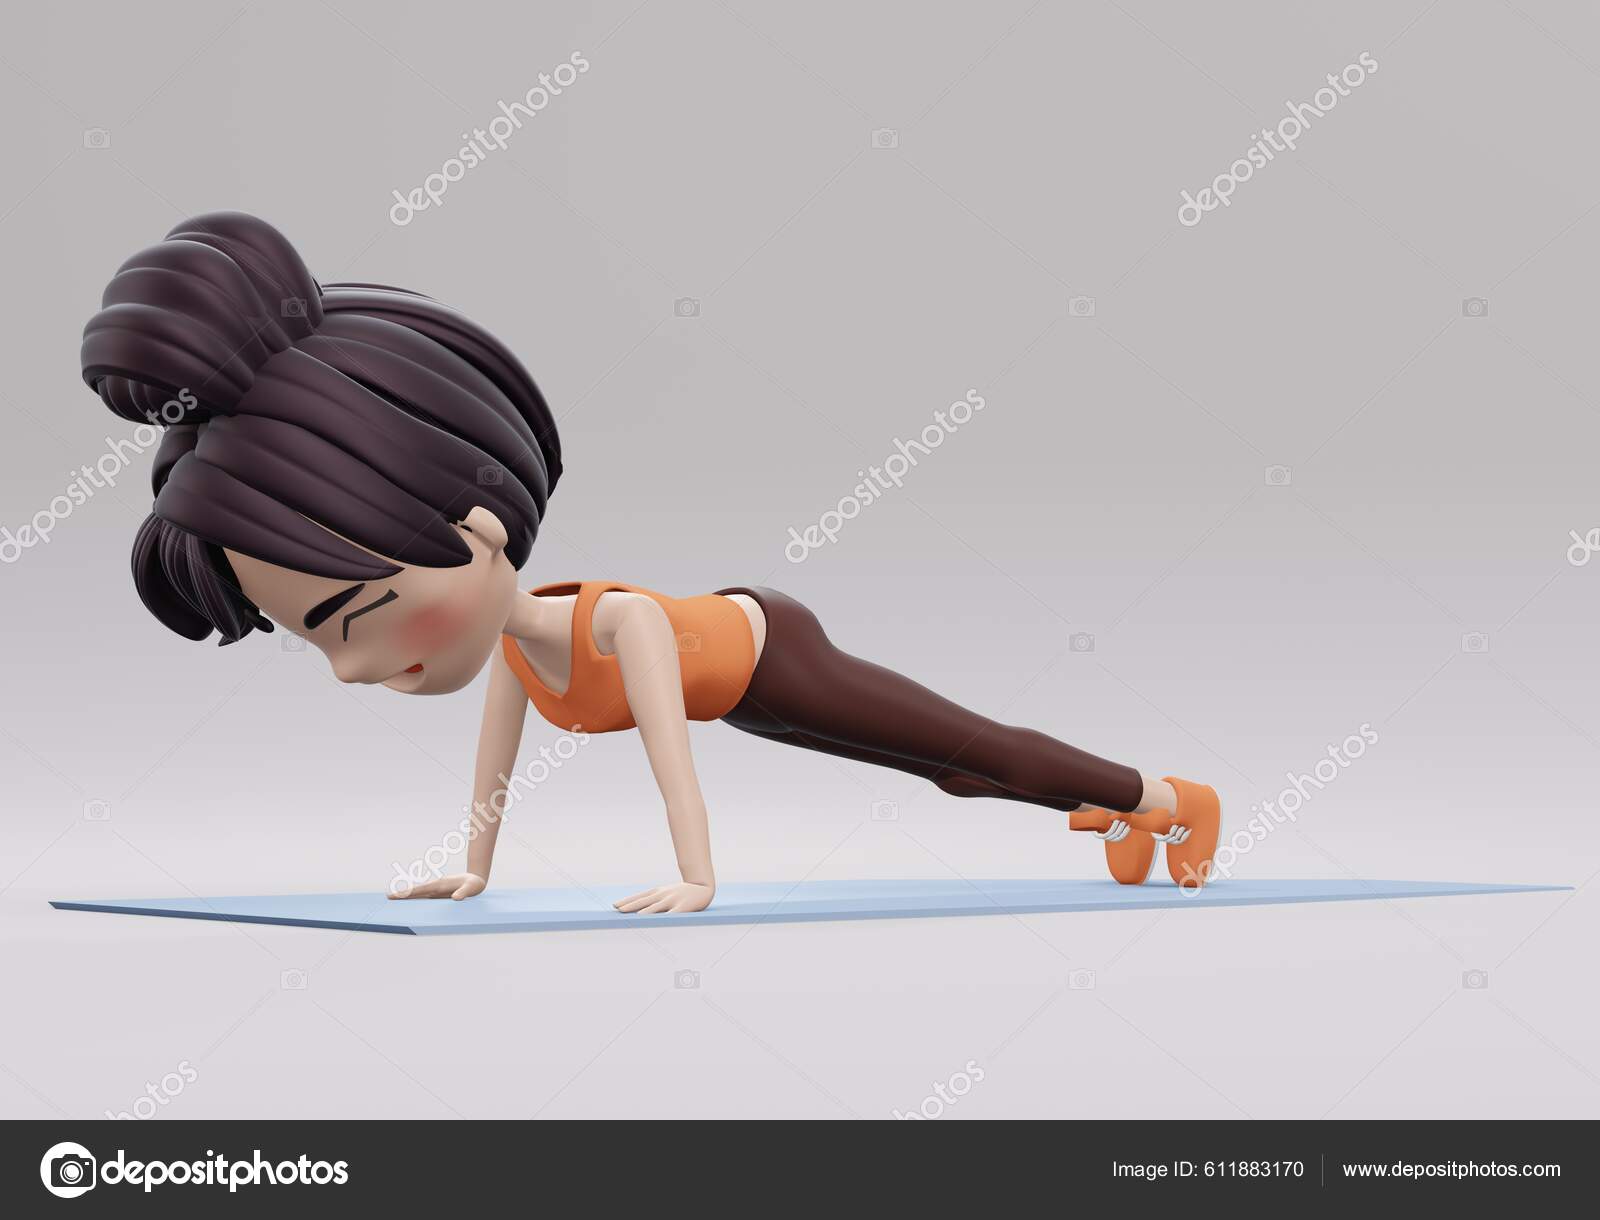 Plank pose Free Stock Photos, Images, and Pictures of Plank pose